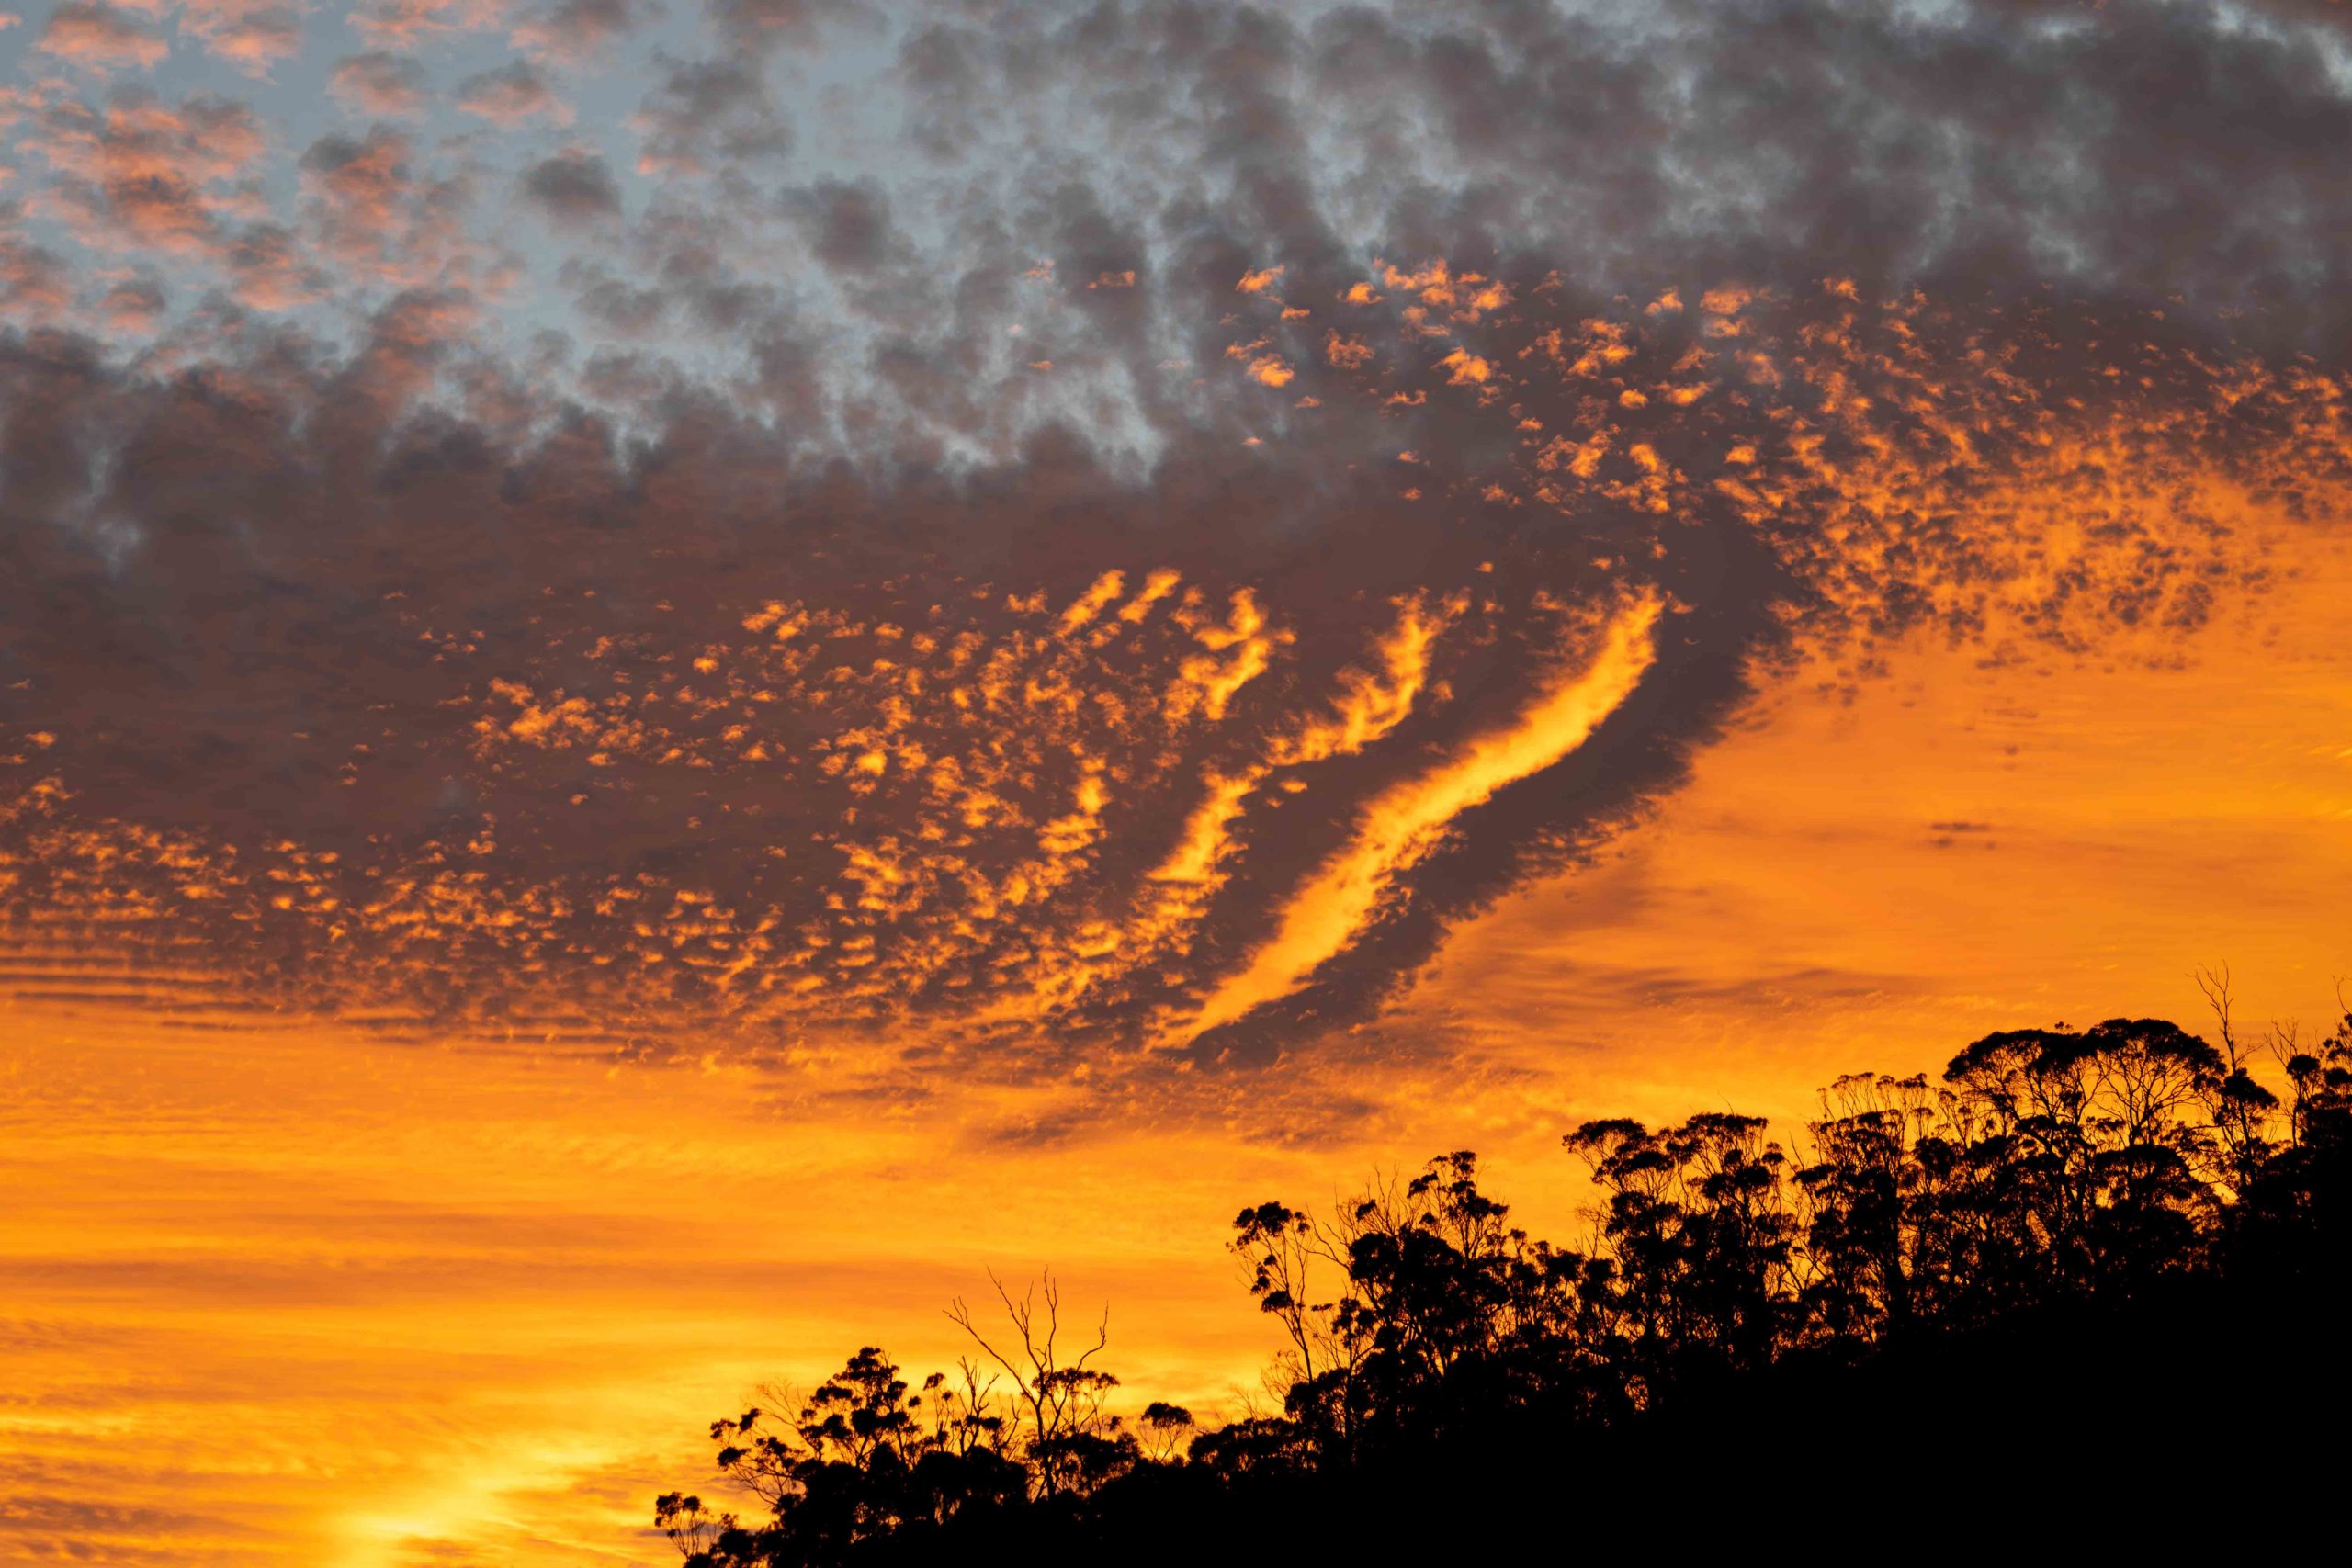 Rippled clouds at sunset over a tree-lined hill